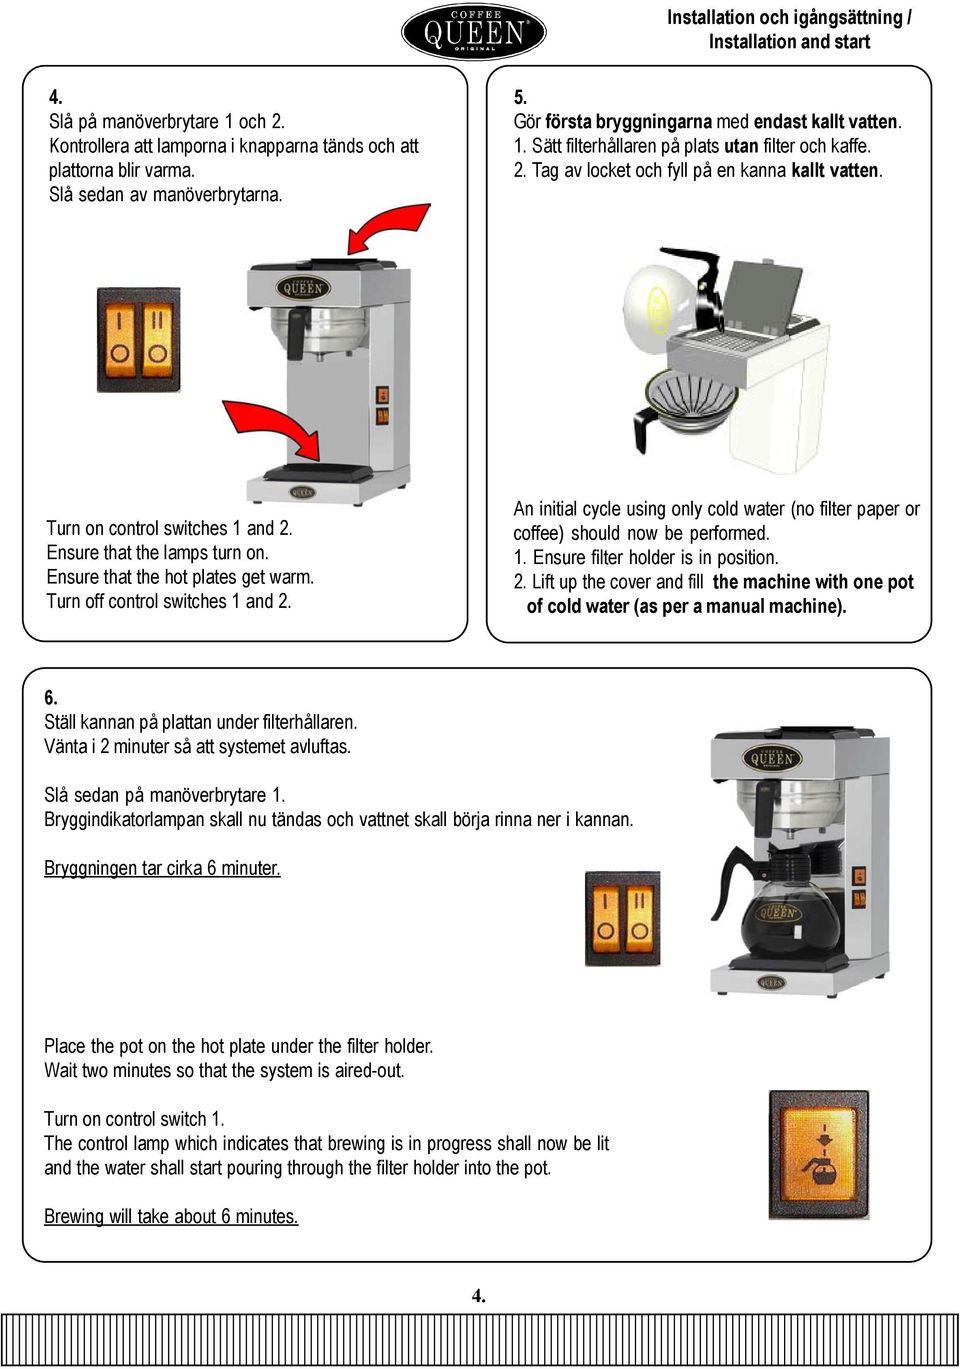 Ensure that the lamps turn on. Ensure that the hot plates get warm. Turn off control switches 1 and 2. An initial cycle using only cold water (no filter paper or coffee) should now be performed. 1. Ensure filter holder is in position.